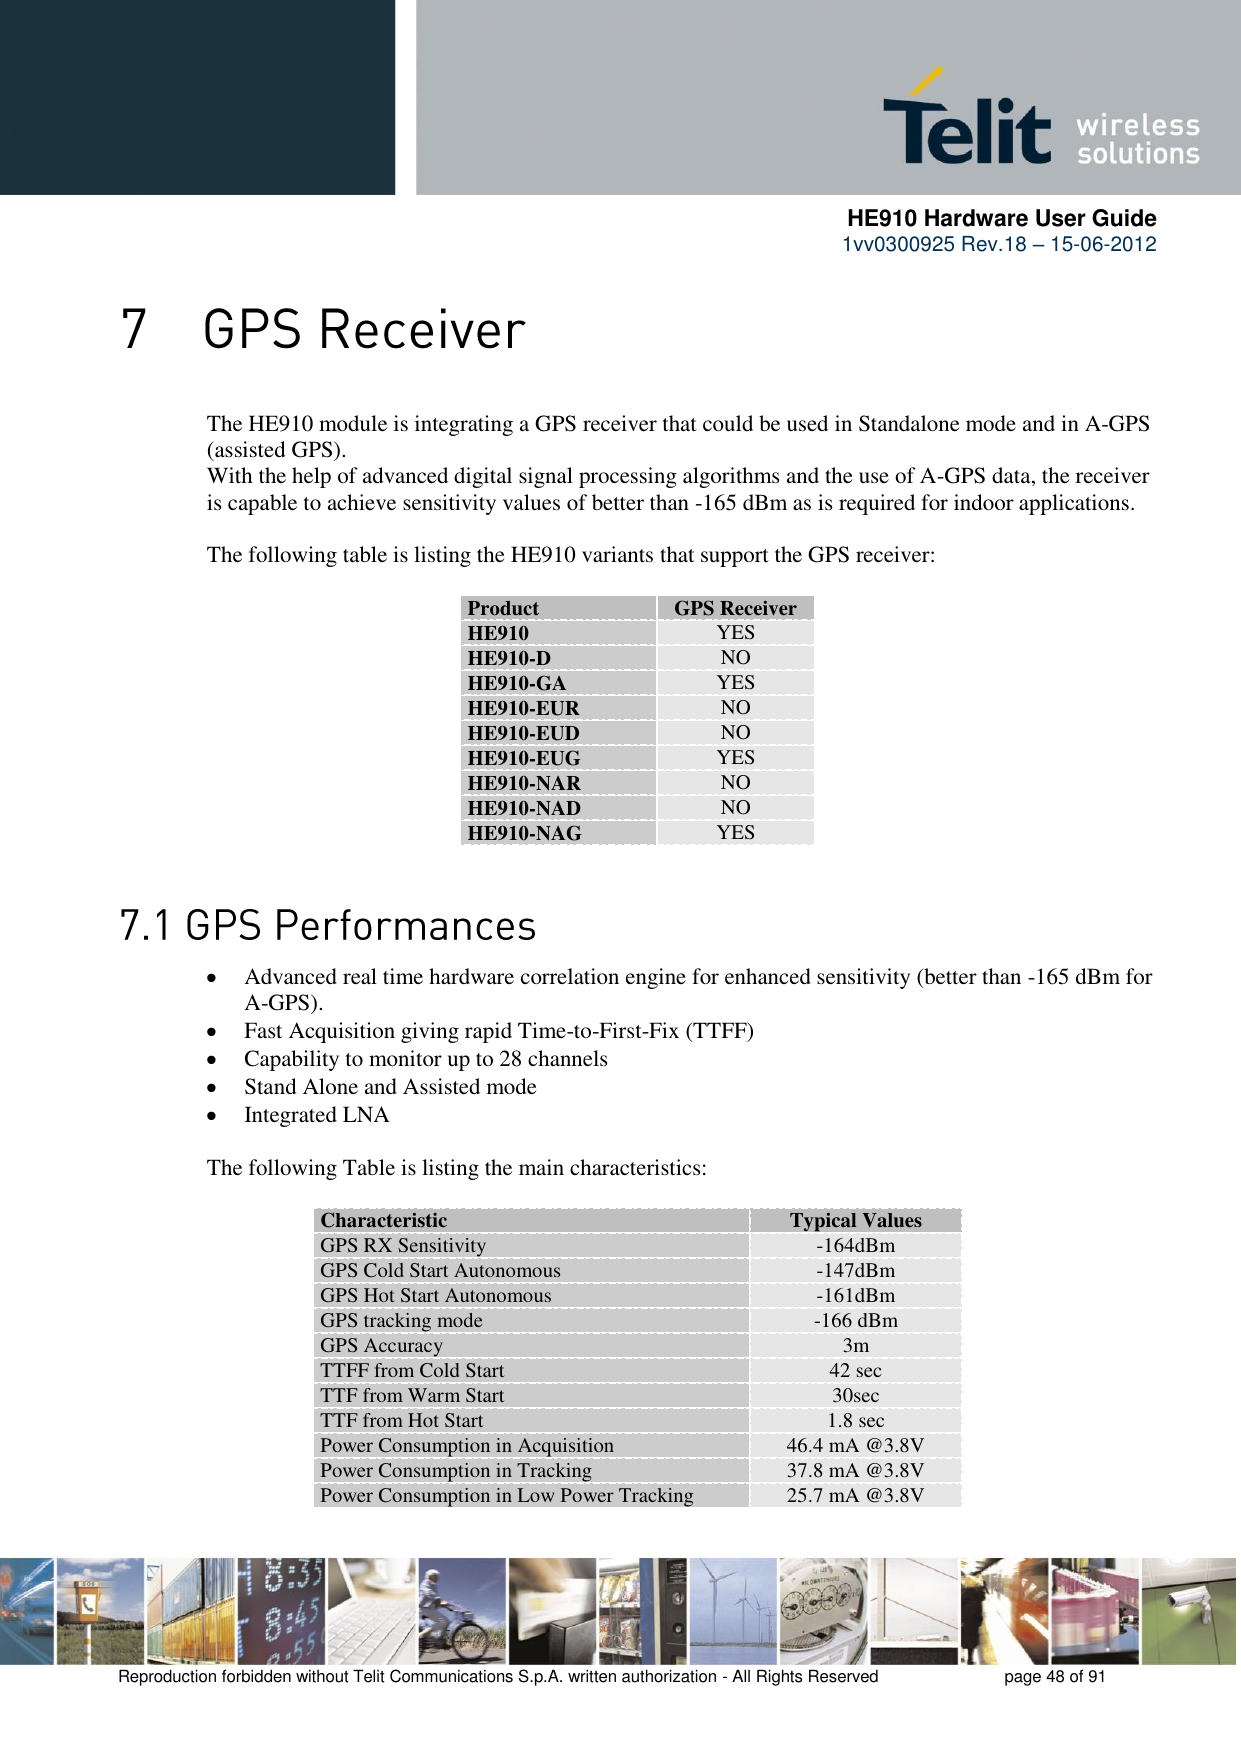      HE910 Hardware User Guide 1vv0300925 Rev.18 – 15-06-2012    Reproduction forbidden without Telit Communications S.p.A. written authorization - All Rights Reserved    page 48 of 91   The HE910 module is integrating a GPS receiver that could be used in Standalone mode and in A-GPS (assisted GPS). With the help of advanced digital signal processing algorithms and the use of A-GPS data, the receiver is capable to achieve sensitivity values of better than -165 dBm as is required for indoor applications.   The following table is listing the HE910 variants that support the GPS receiver:  Product GPS Receiver HE910 YES HE910-D NO HE910-GA YES HE910-EUR NO HE910-EUD NO HE910-EUG YES HE910-NAR NO HE910-NAD NO HE910-NAG YES    Advanced real time hardware correlation engine for enhanced sensitivity (better than -165 dBm for A-GPS).  Fast Acquisition giving rapid Time-to-First-Fix (TTFF)  Capability to monitor up to 28 channels  Stand Alone and Assisted mode  Integrated LNA  The following Table is listing the main characteristics:  Characteristic Typical Values GPS RX Sensitivity -164dBm GPS Cold Start Autonomous -147dBm GPS Hot Start Autonomous -161dBm GPS tracking mode -166 dBm GPS Accuracy 3m  TTFF from Cold Start 42 sec TTF from Warm Start 30sec TTF from Hot Start 1.8 sec Power Consumption in Acquisition 46.4 mA @3.8V Power Consumption in Tracking 37.8 mA @3.8V Power Consumption in Low Power Tracking 25.7 mA @3.8V  